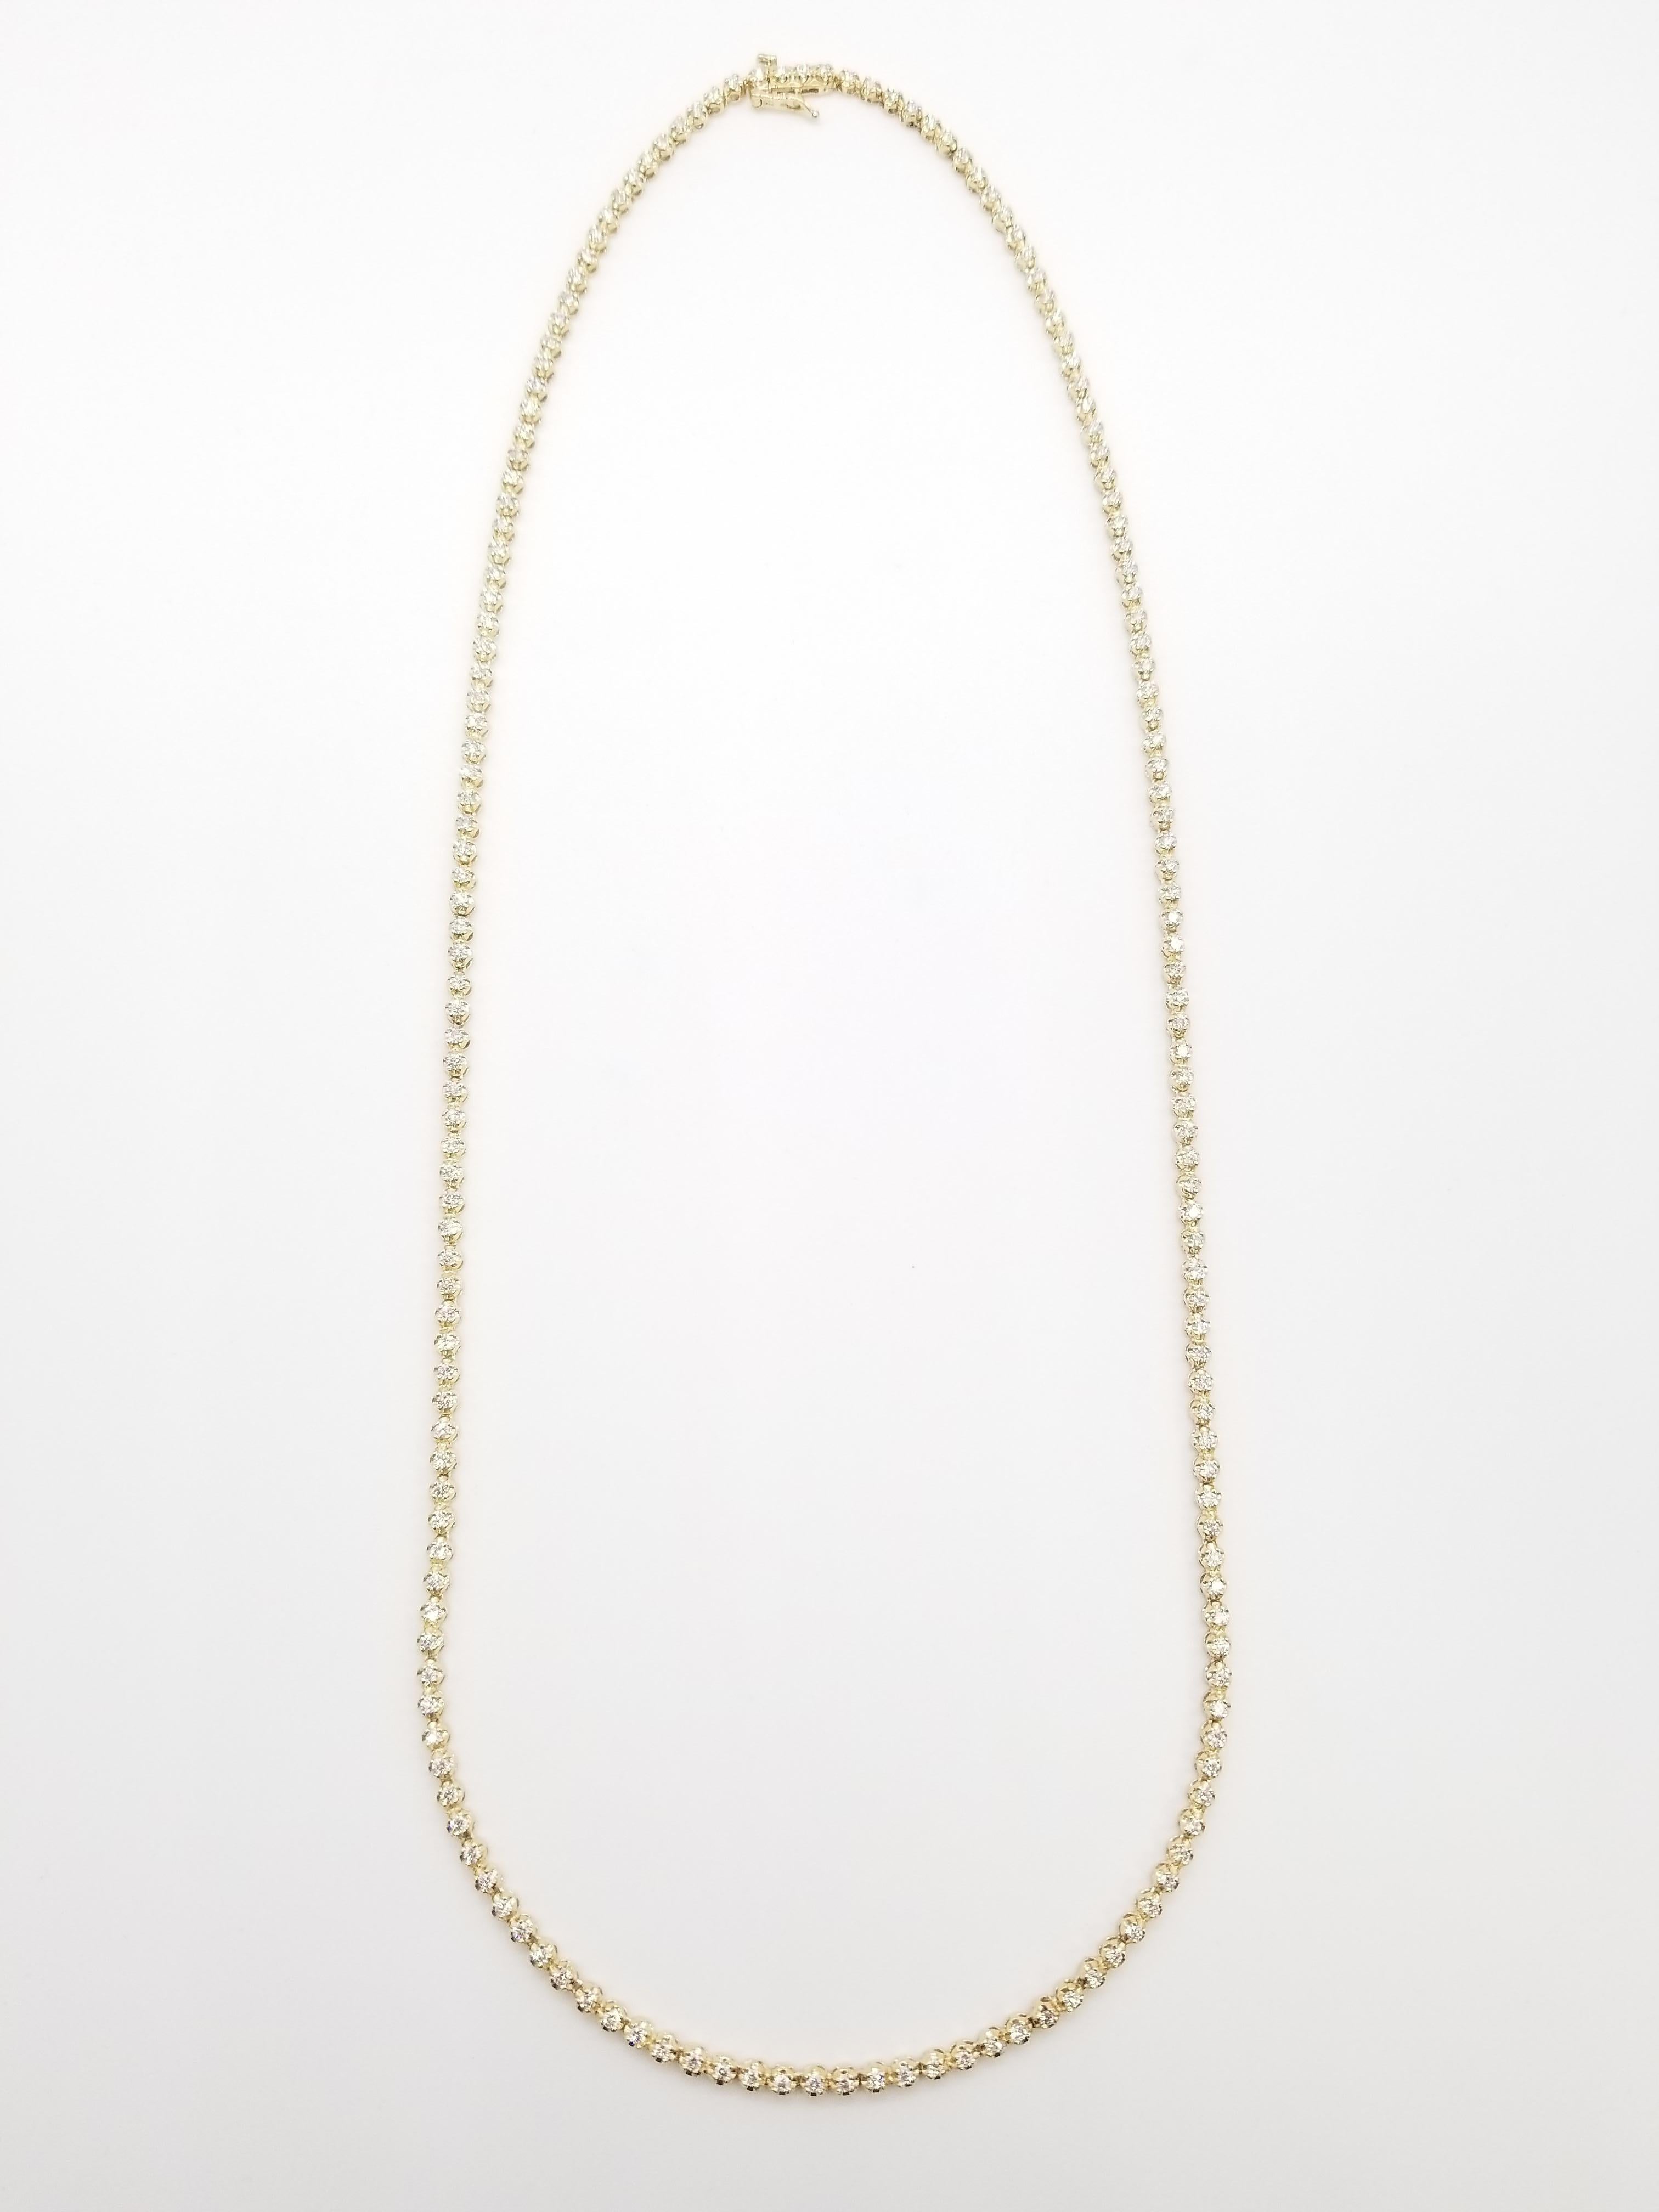 Brilliant and beautiful buttercup necklace, natural round-brilliant cut white diamonds clean and excellent shine. 14k yellow gold buttercup setting. 
20 inch length. Average H-I Color, VS-SI Clarity. Elegance for every occasion.